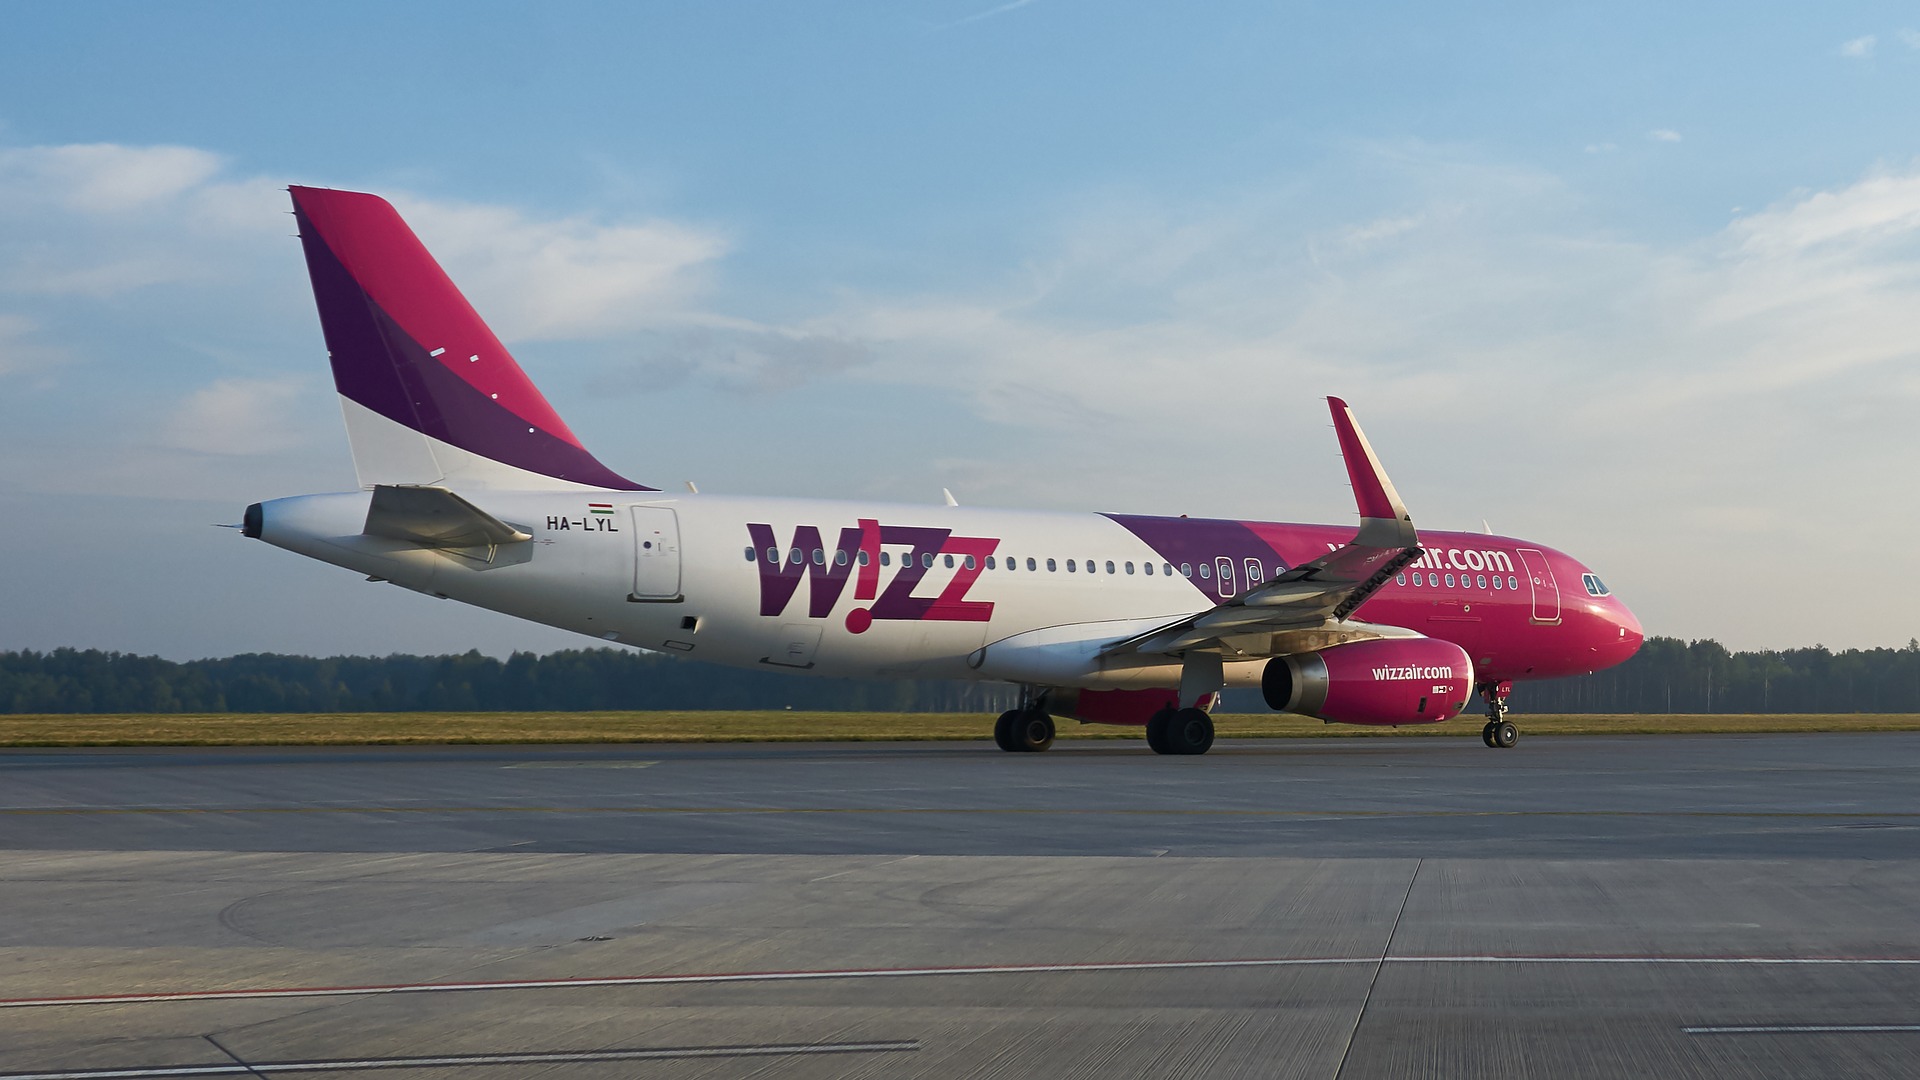 Wizz air claim compensation flight delayed or cancelled